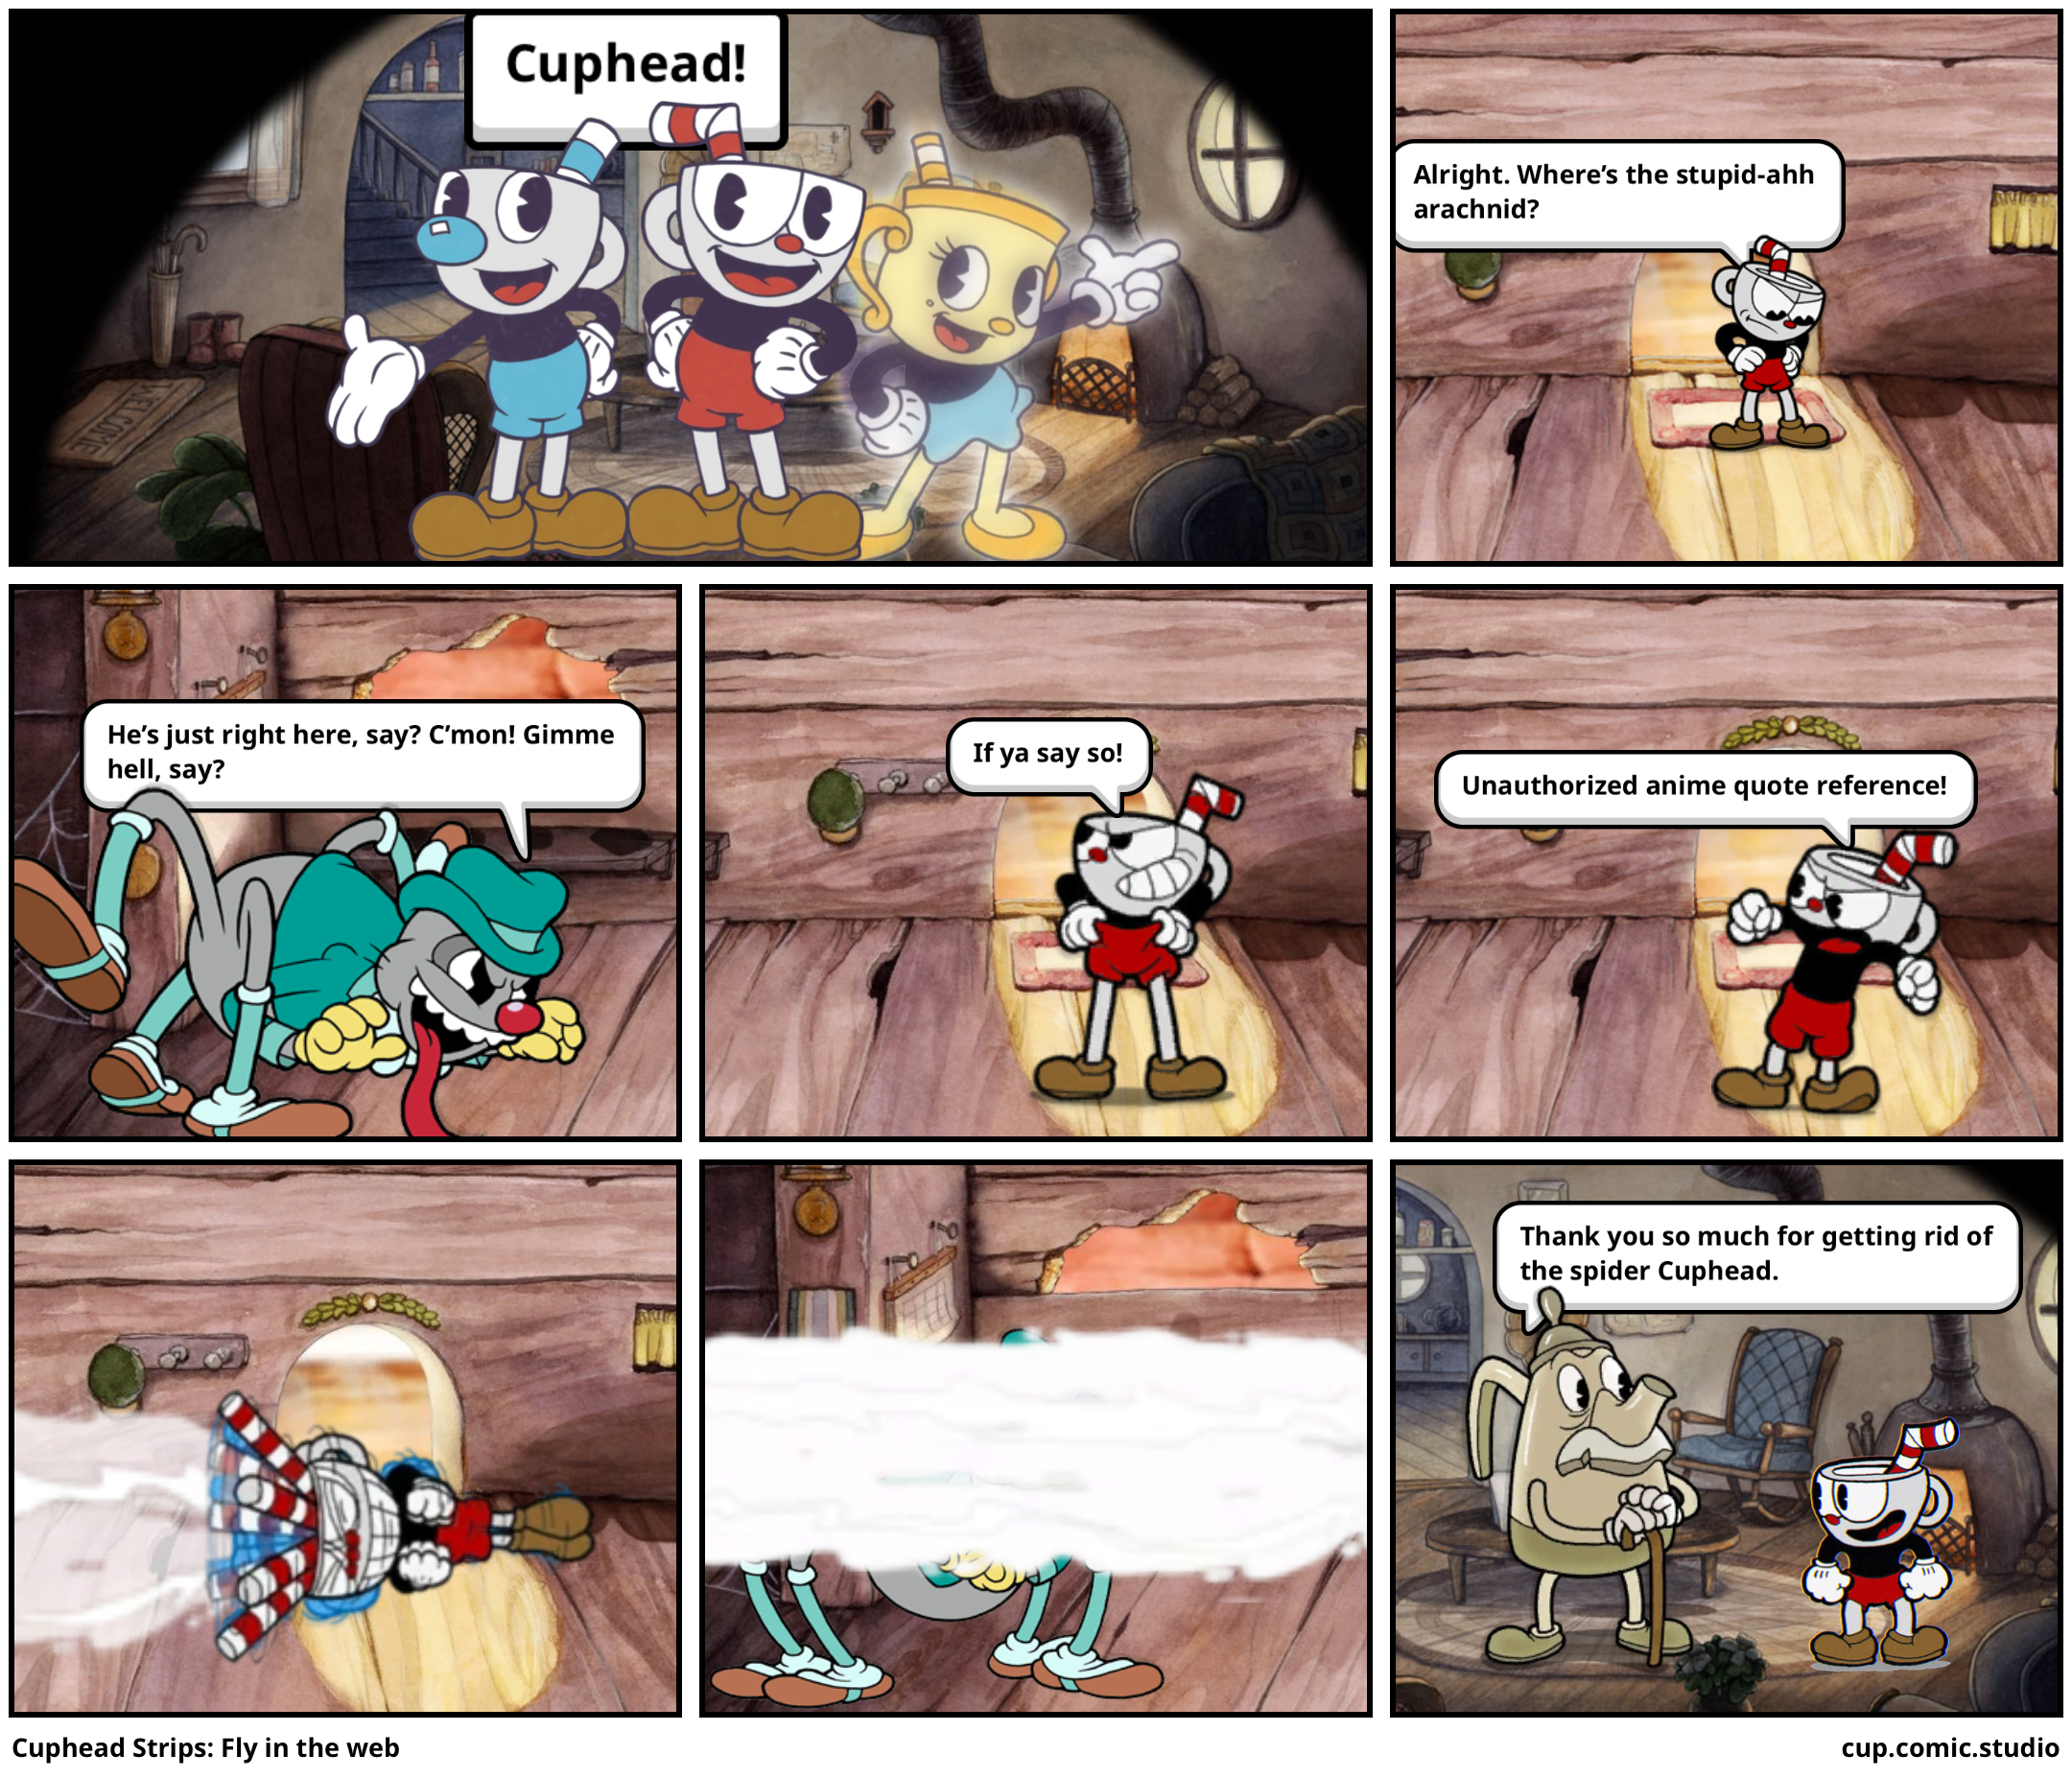 Cuphead Strips: Fly in the web